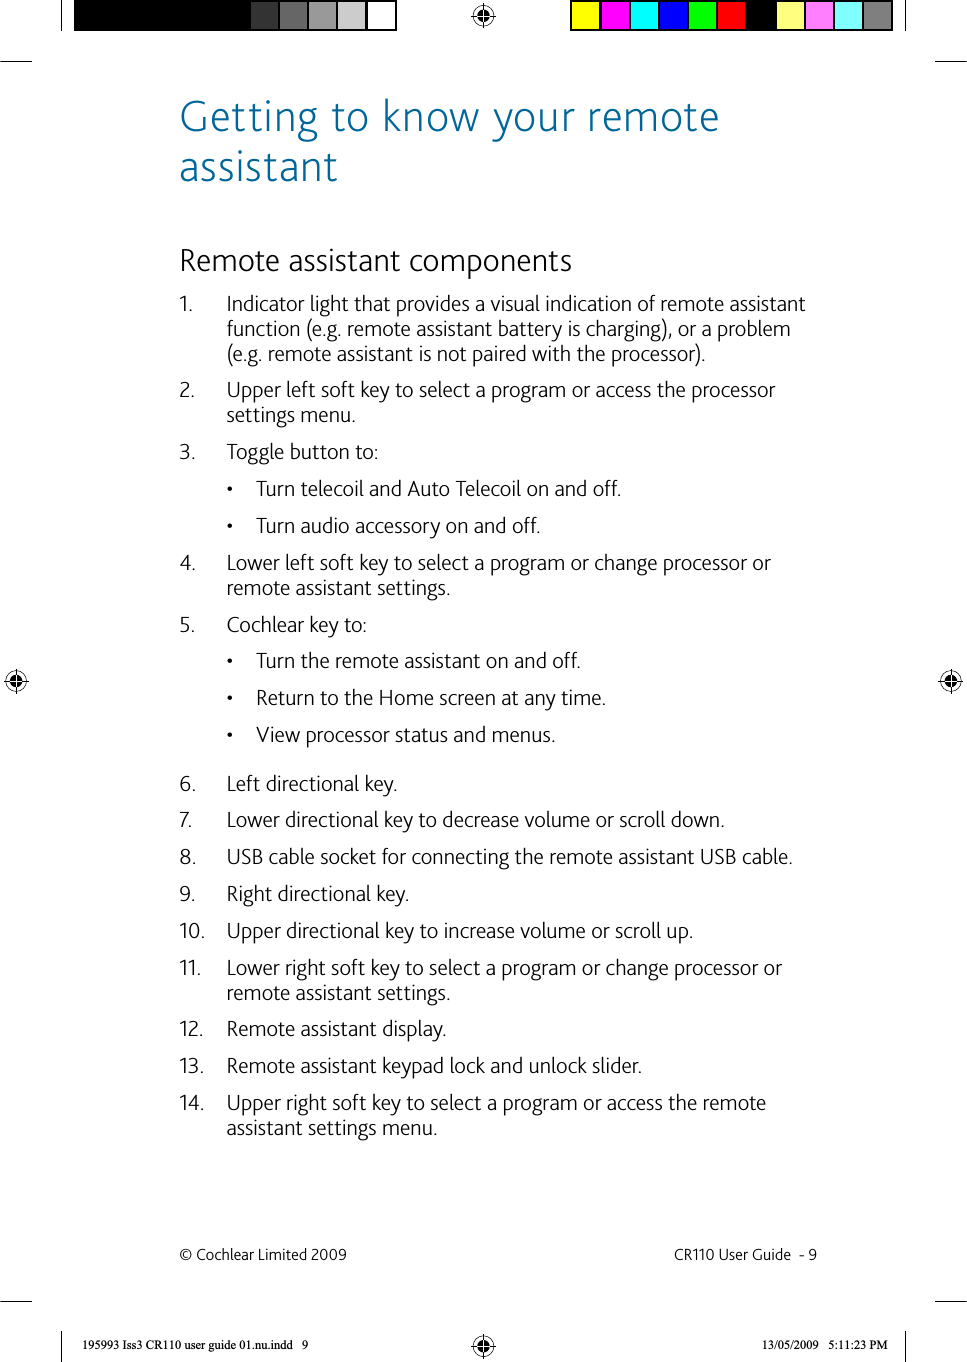 Getting to know your remote assistant Remote assistant componentsIndicator light that provides a visual indication of remote assistant 1. function (e.g. remote assistant battery is charging), or a problem (e.g. remote assistant is not paired with the processor).Upper left soft key to select a program or access the processor 2. settings menu.Toggle button to:3. Turn telecoil and Auto Telecoil on and off.• Turn audio accessory on and off.• Lower left soft key to select a program or change processor or 4. remote assistant settings.Cochlear key to:5. Turn the remote assistant on and off.• Return to the Home screen at any time.• View processor status and menus.• Left directional key.6. Lower directional key to decrease volume or scroll down.7. USB cable socket for connecting the remote assistant USB cable.8. Right directional key.9. Upper directional key to increase volume or scroll up.10. Lower right soft key to select a program or change processor or 11. remote assistant settings.Remote assistant display.12. Remote assistant keypad lock and unlock slider.13. Upper right soft key to select a program or access the remote 14. assistant settings menu.© Cochlear Limited 2009  CR110 User Guide  - 9195993 Iss3 CR110 user guide 01.nu.indd   9 13/05/2009   5:11:23 PM